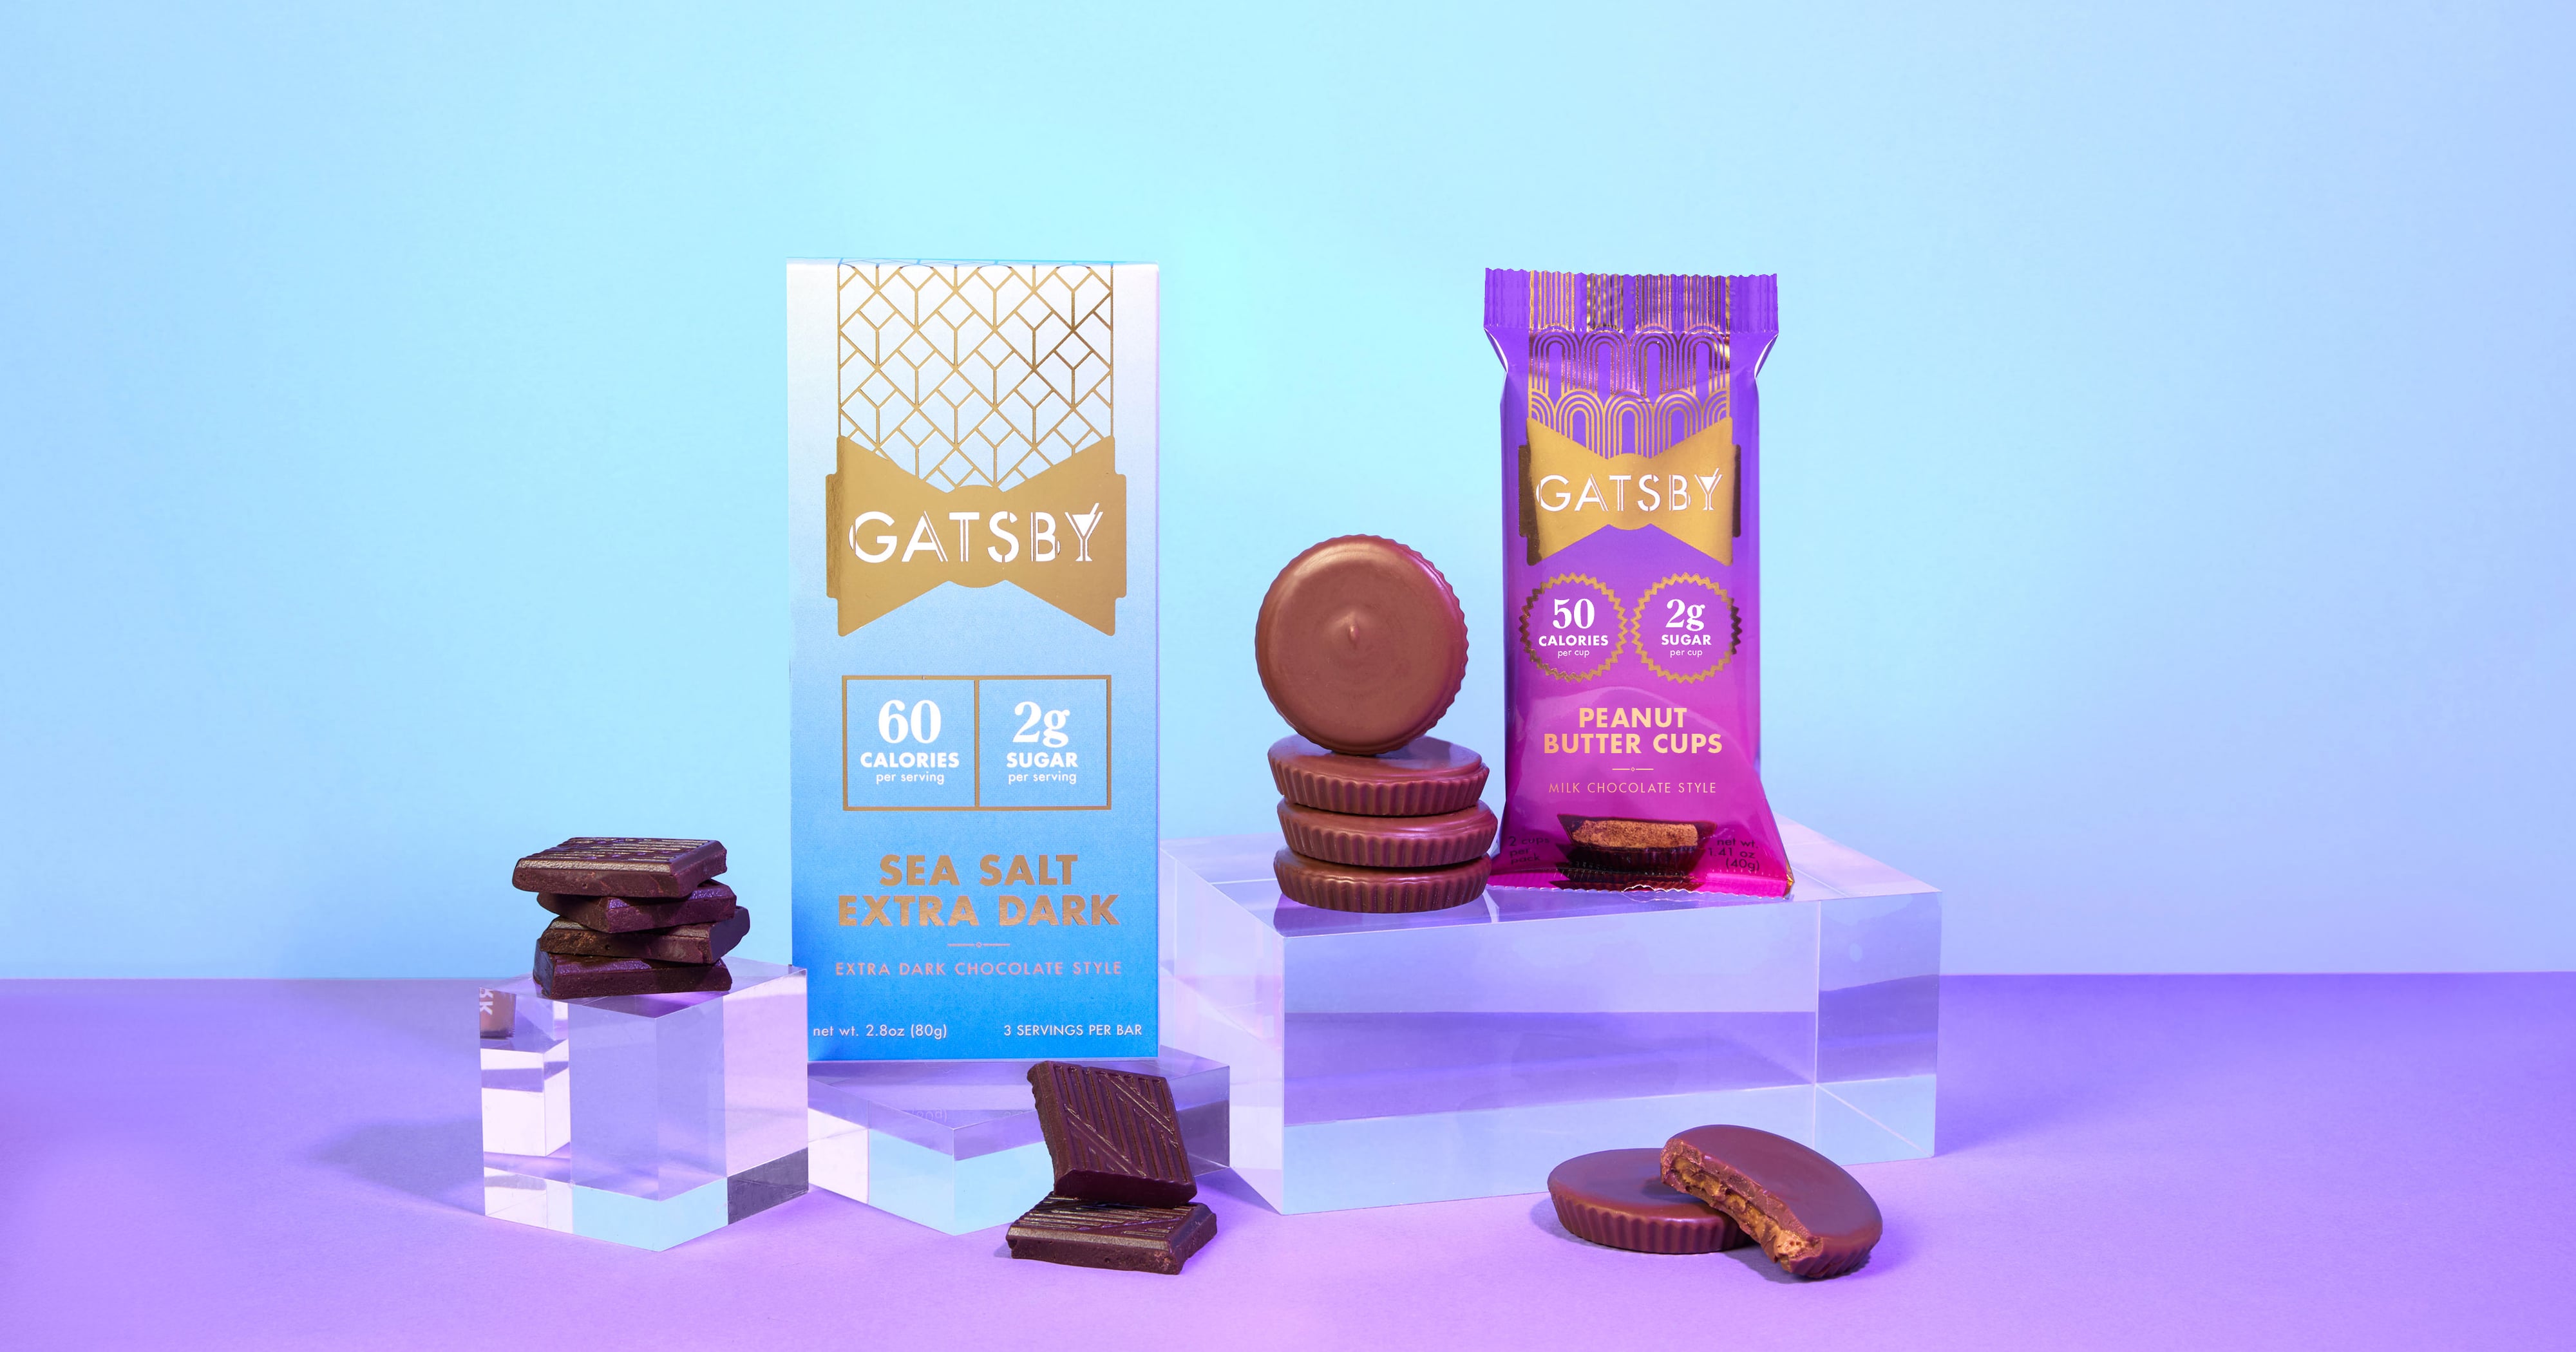 Gatsby Chocolate - Guilt Free Low-calorie Chocolate - Mamacita On The Move